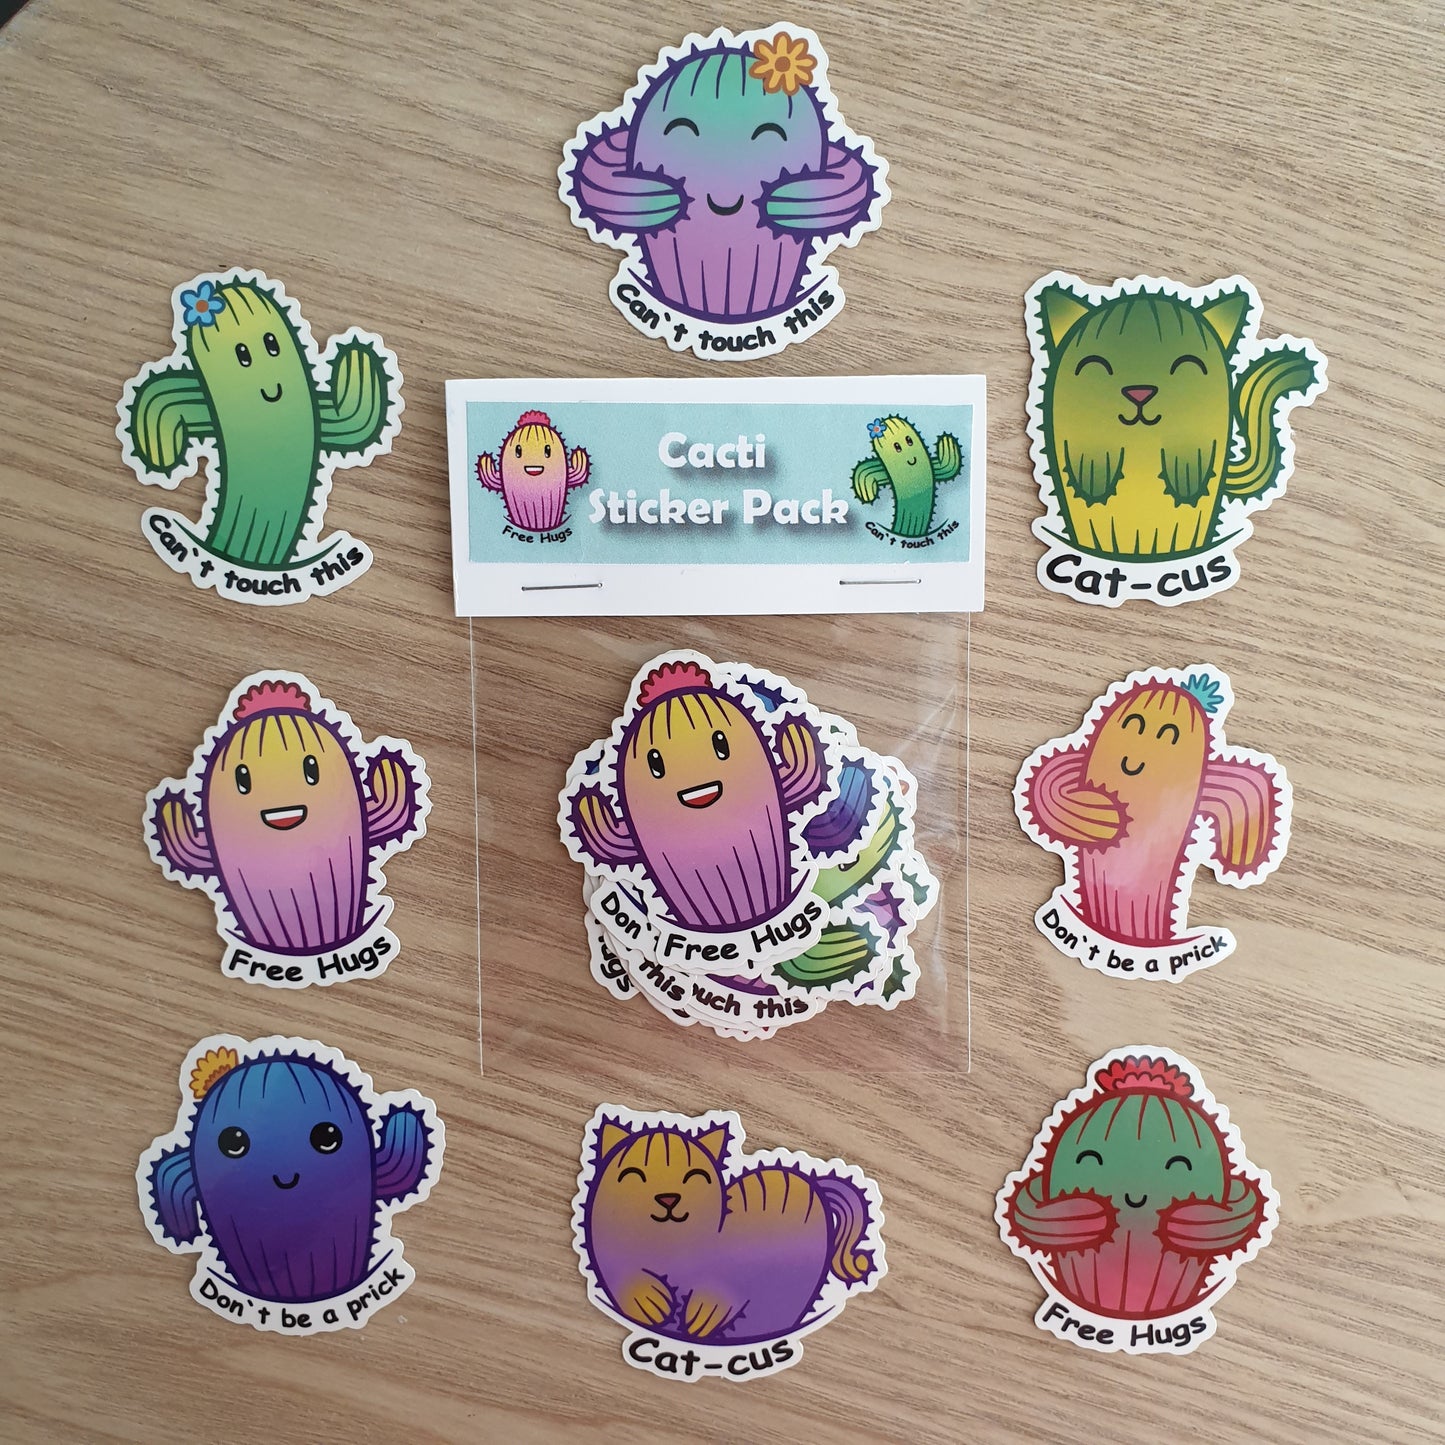 Cactus Sticker - "Free Hugs" - red and green